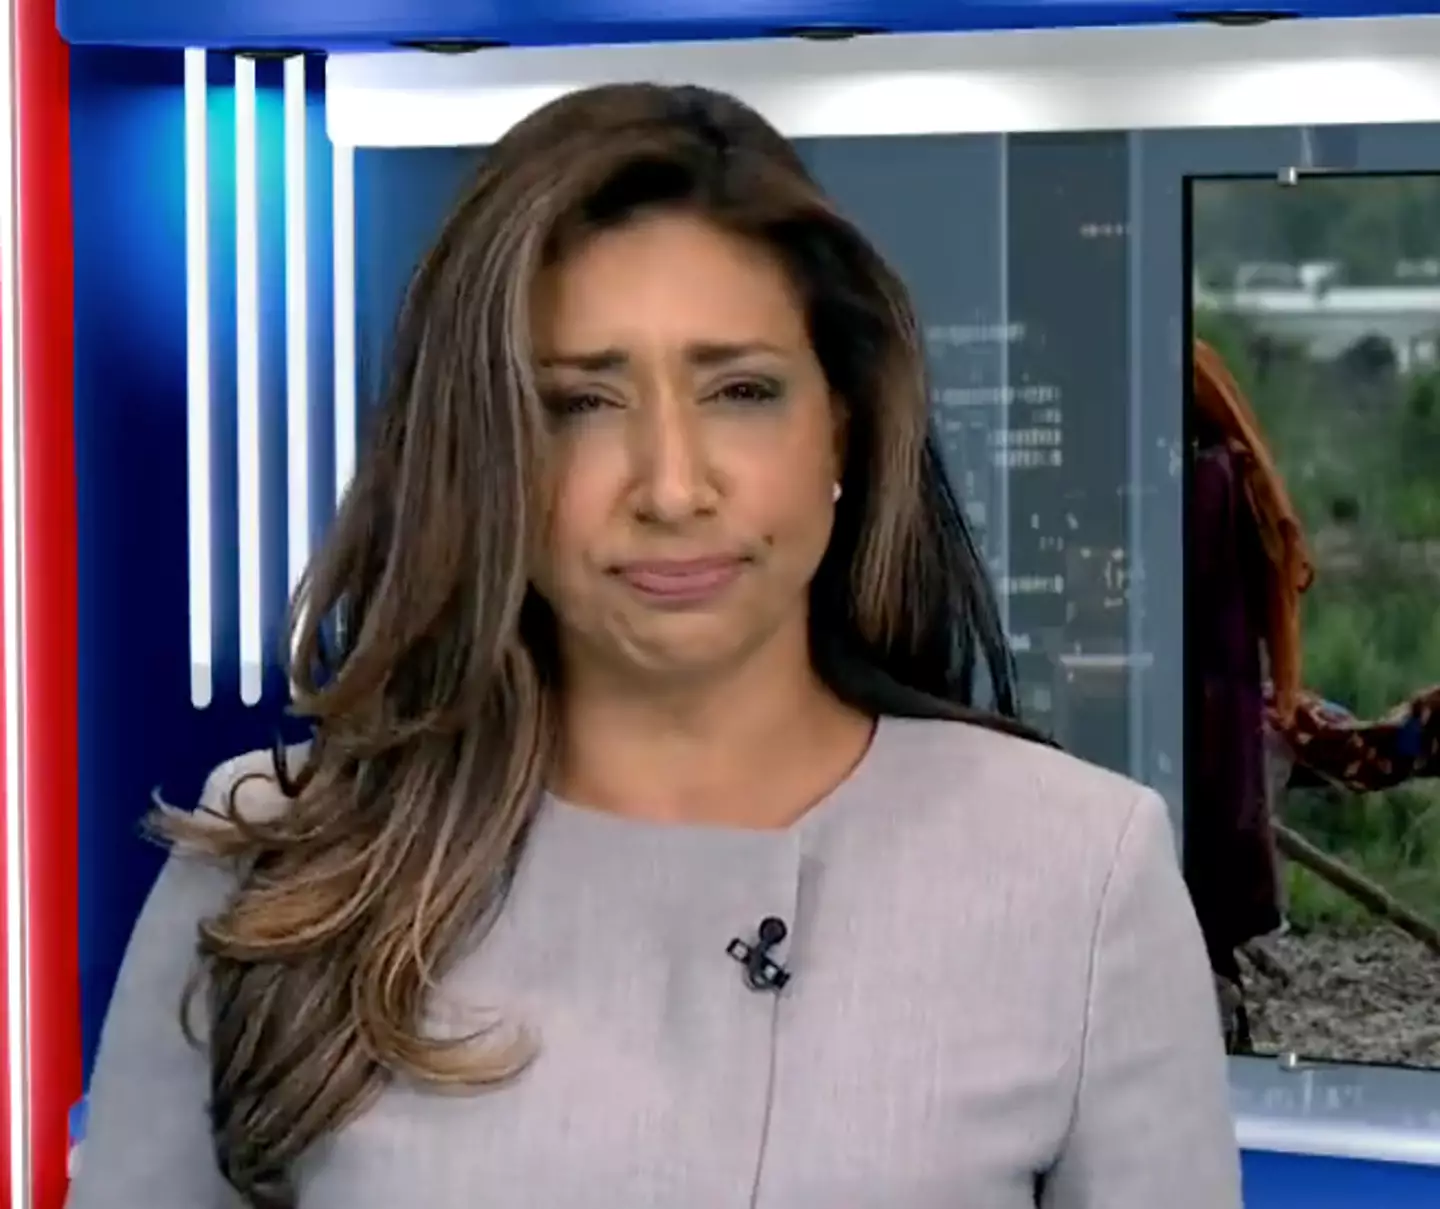 Canada’s Global News host, Farah Nasser, barely flinched as the fly buzzed into her mouth as she continued to read her script without a sweat.